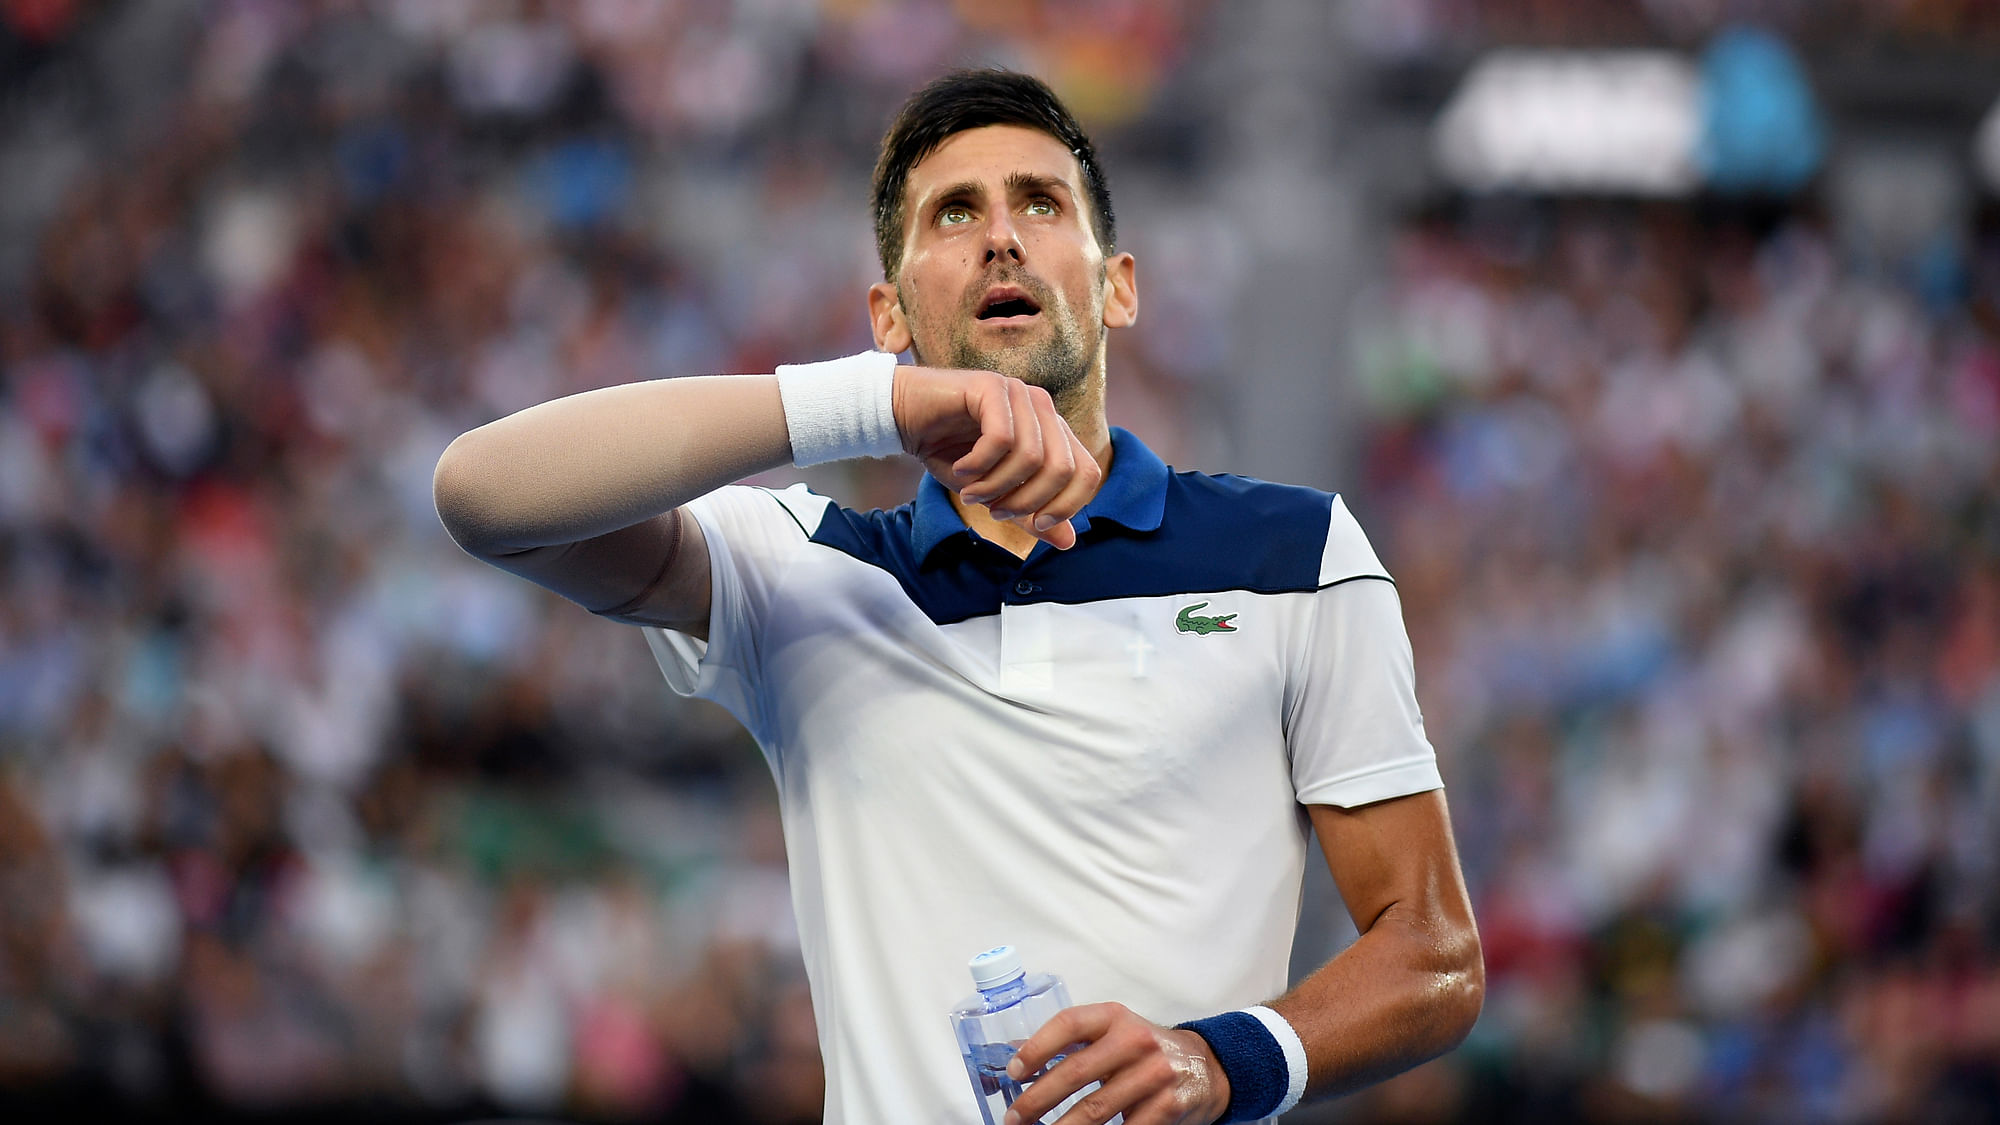 Novak Djokovic bowed out of the Australian Open in the fourth round.